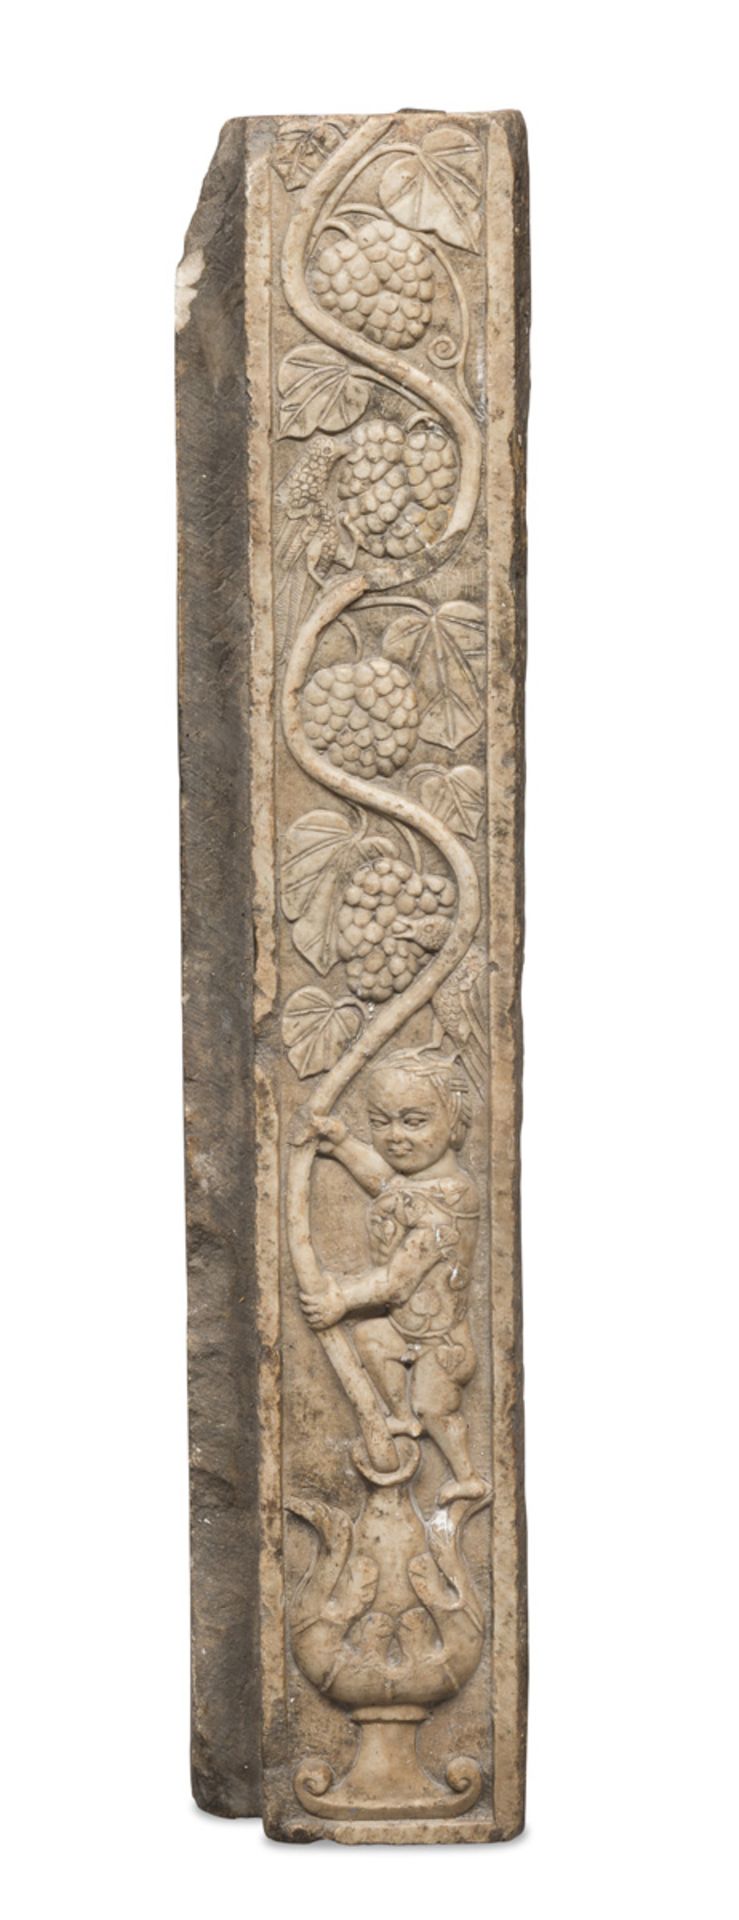 RARE ARCHITECTURAL ELEMENT IN WHITE MARBLE - CENTRAL ITALY 10TH-11TH CENTURY